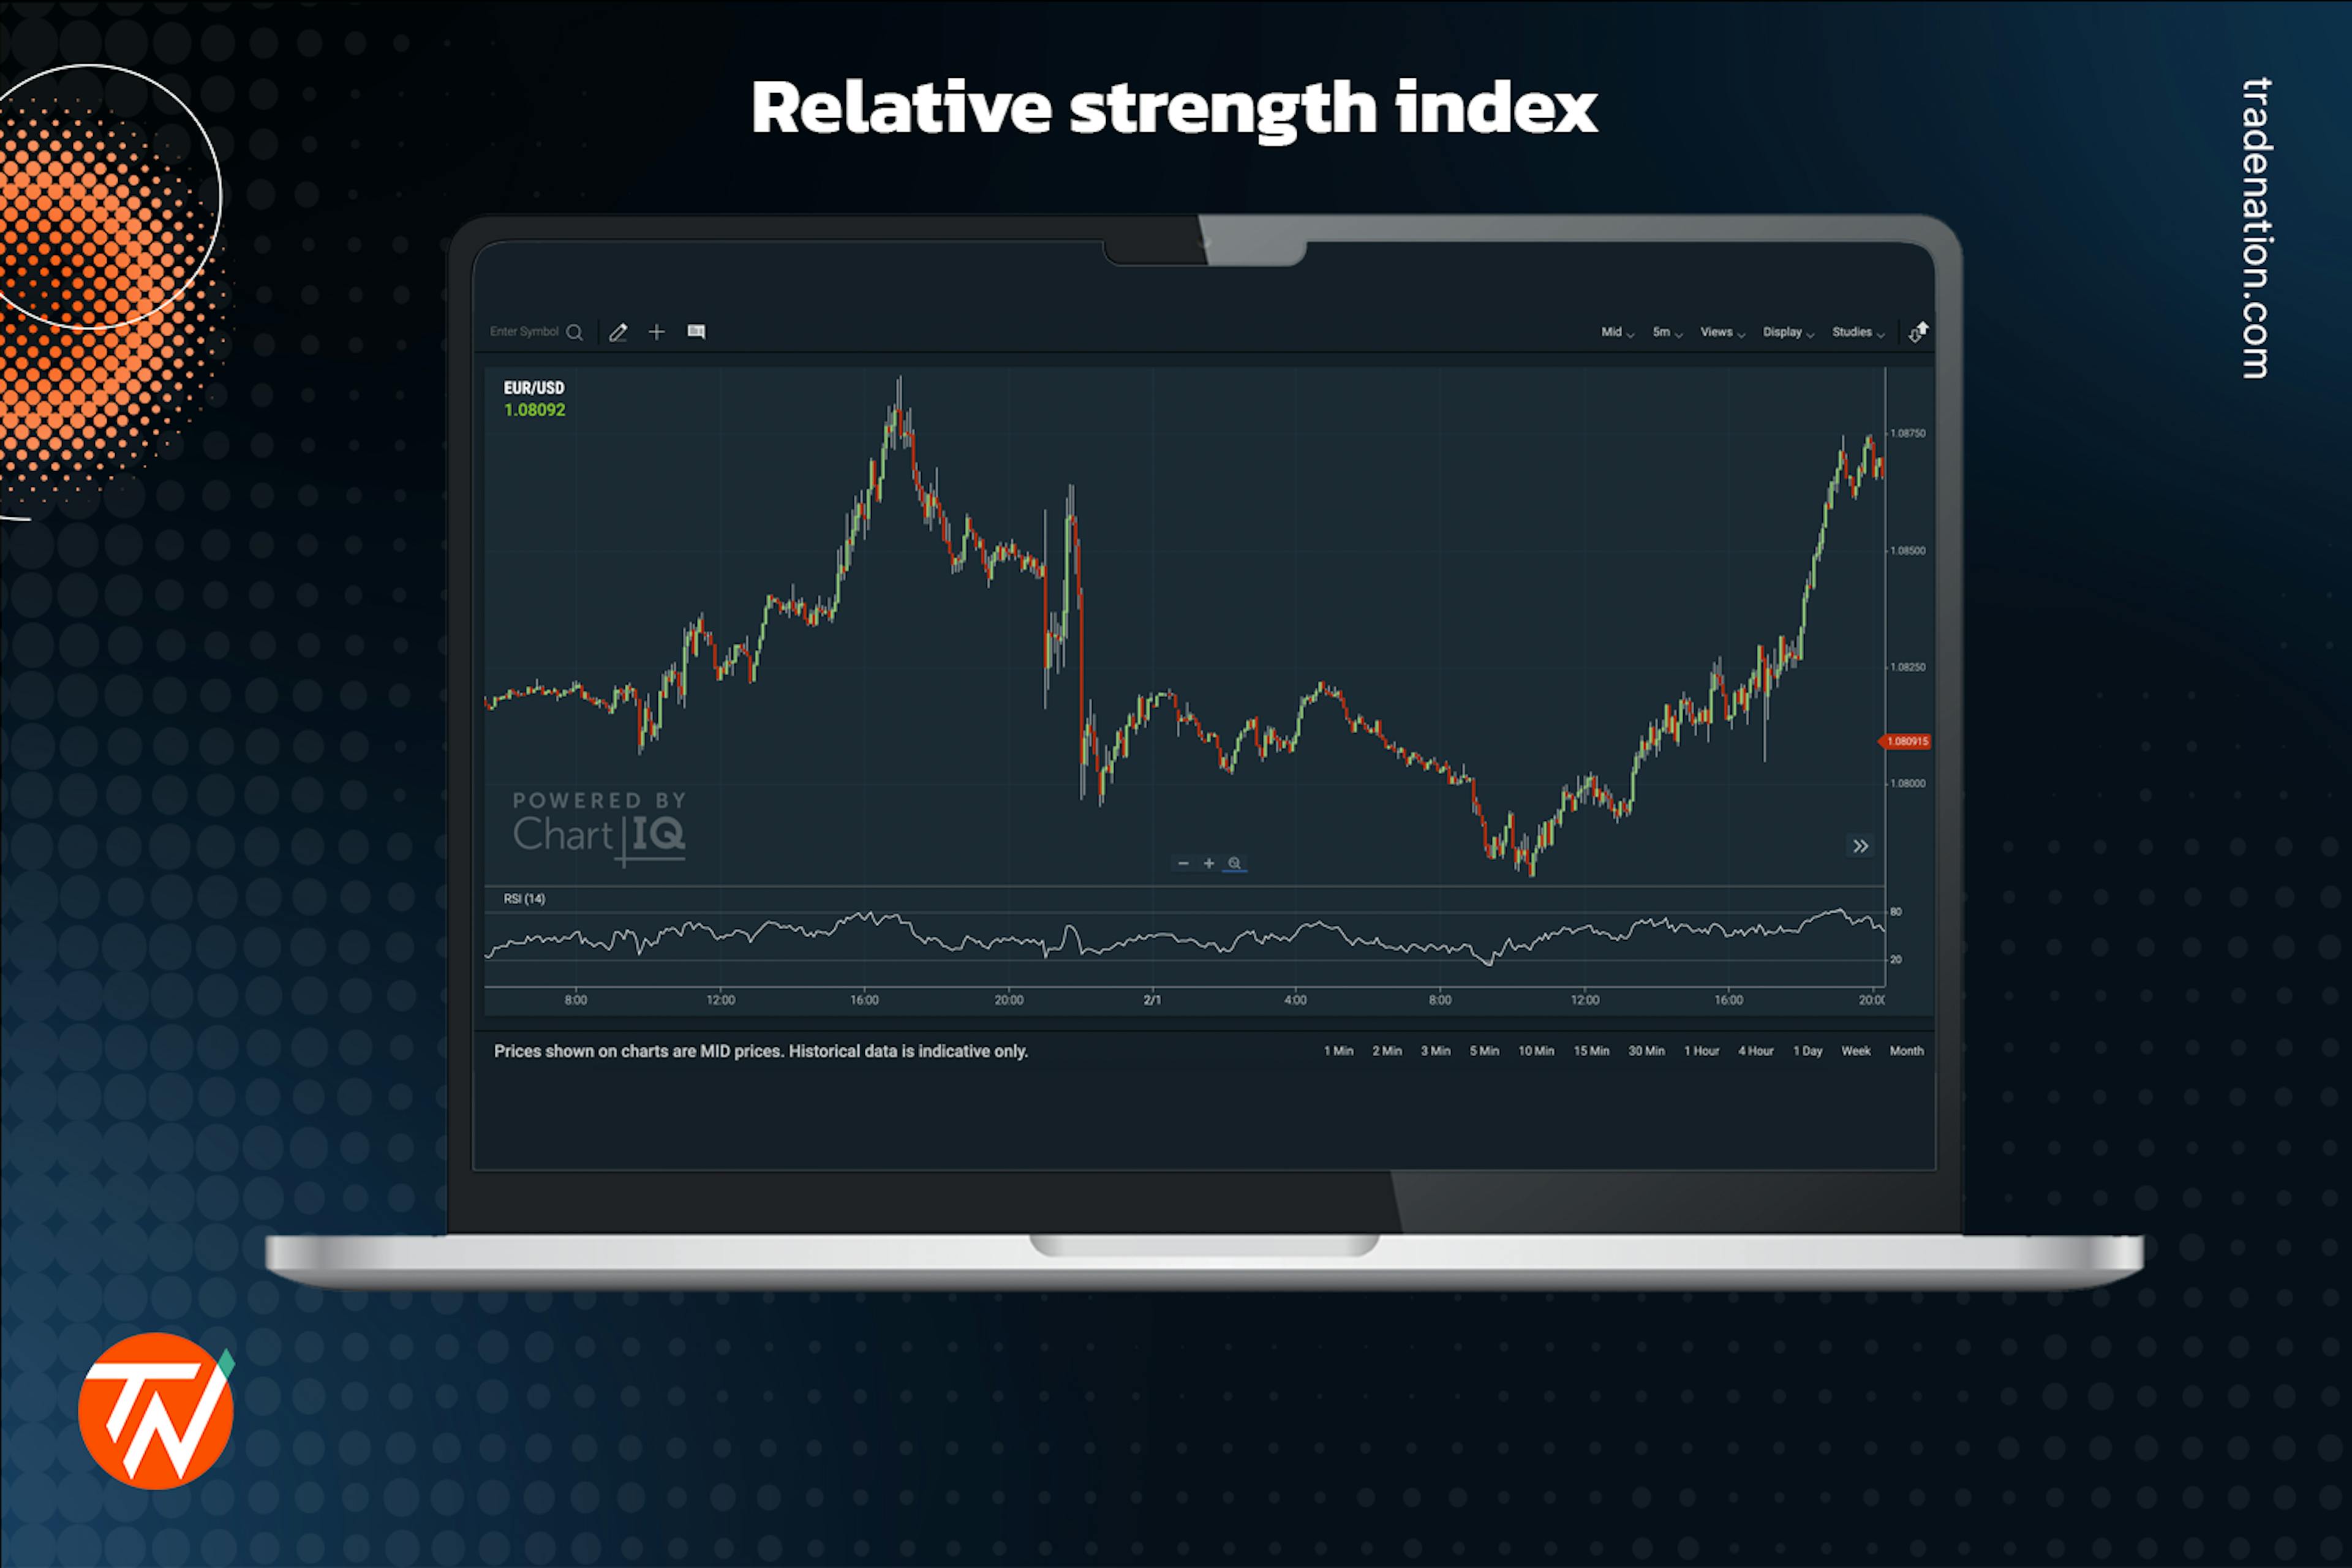 Relative strength index demonstrated